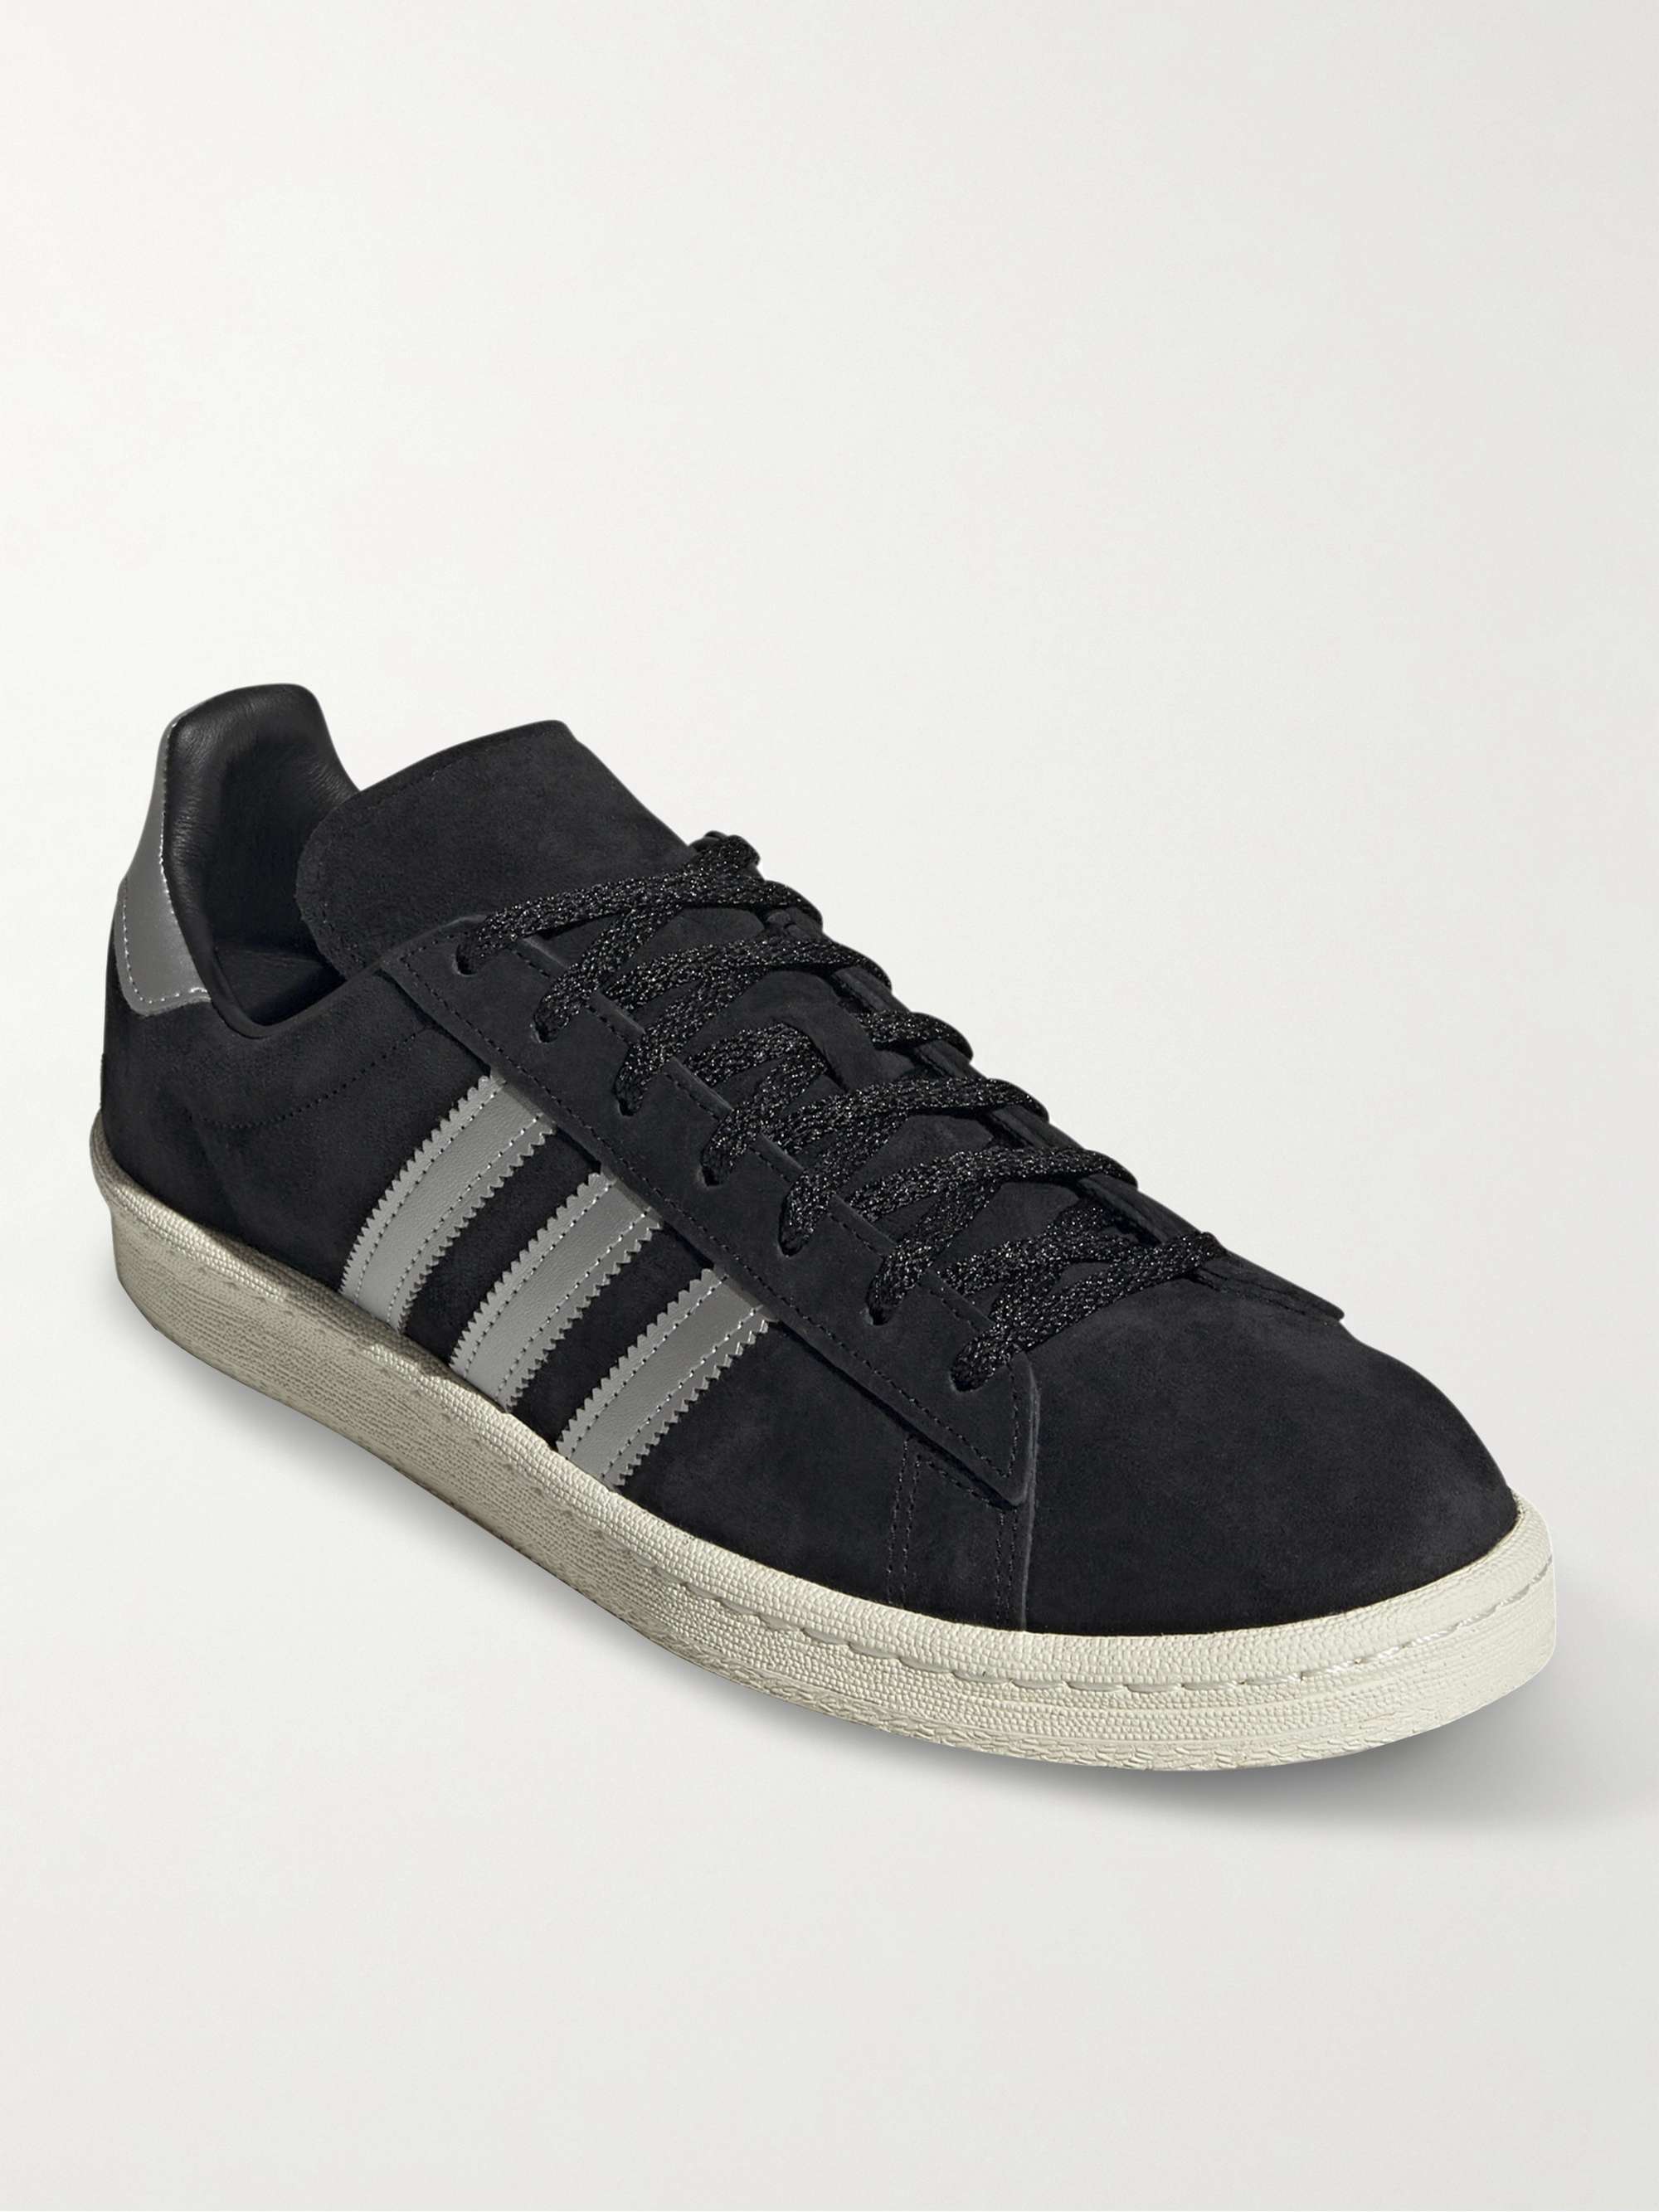 ADIDAS ORIGINALS Campus 80s Leather-Trimmed Suede Sneakers for Men | MR  PORTER